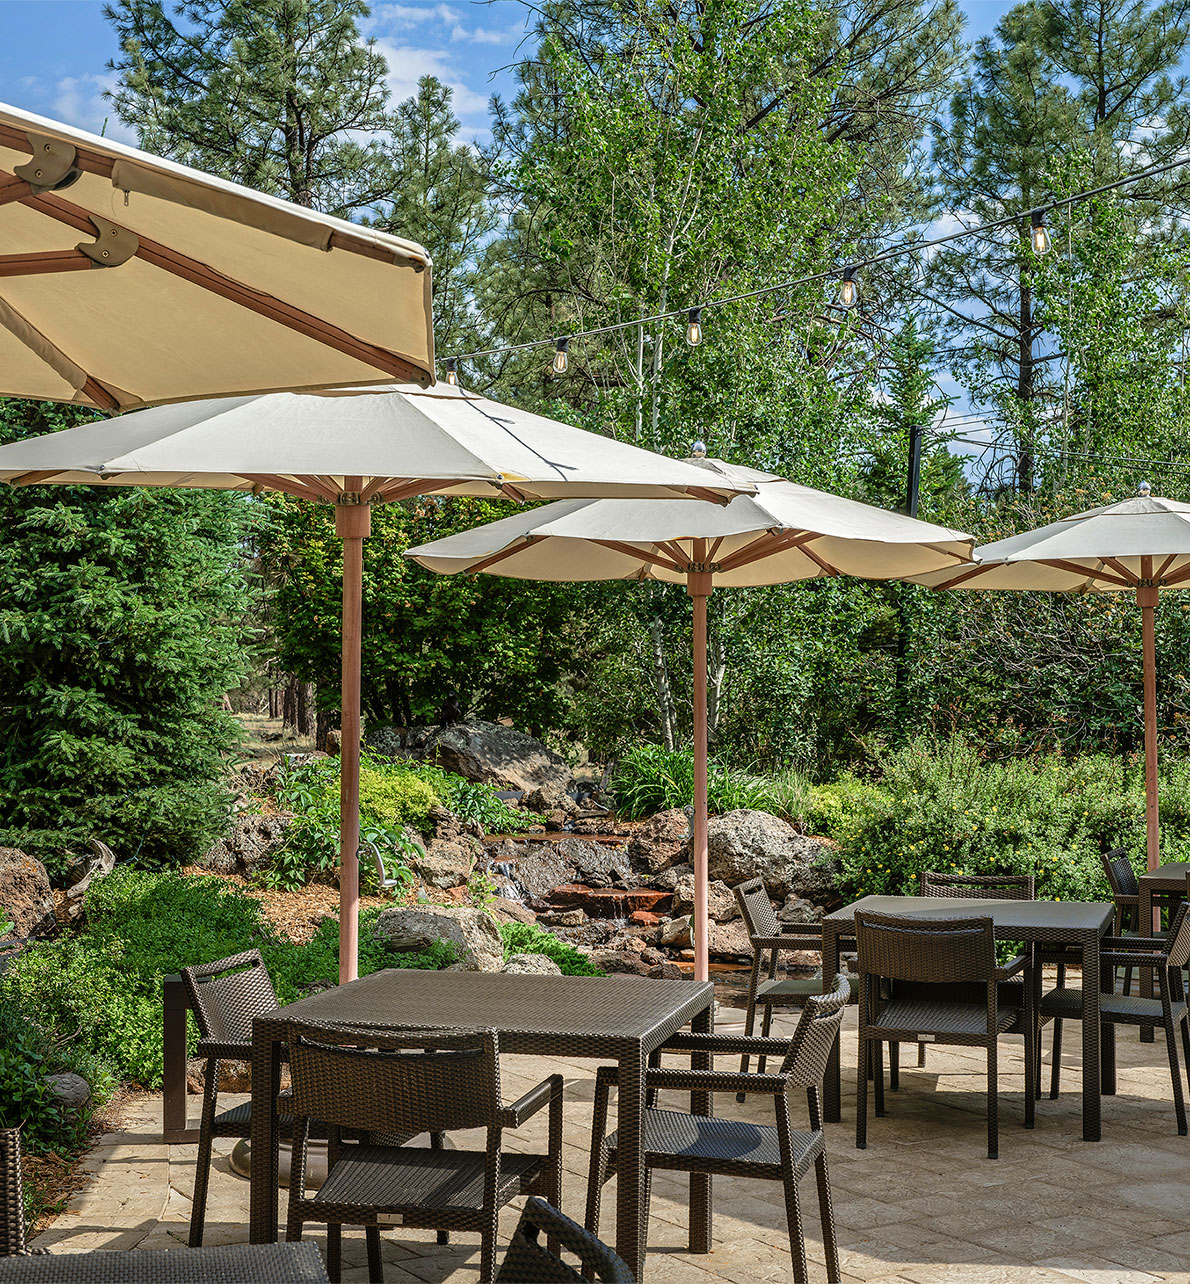 The patio at Silver Pine Restaurant with tables, chairs and umbrellas with a waterfall in the background.